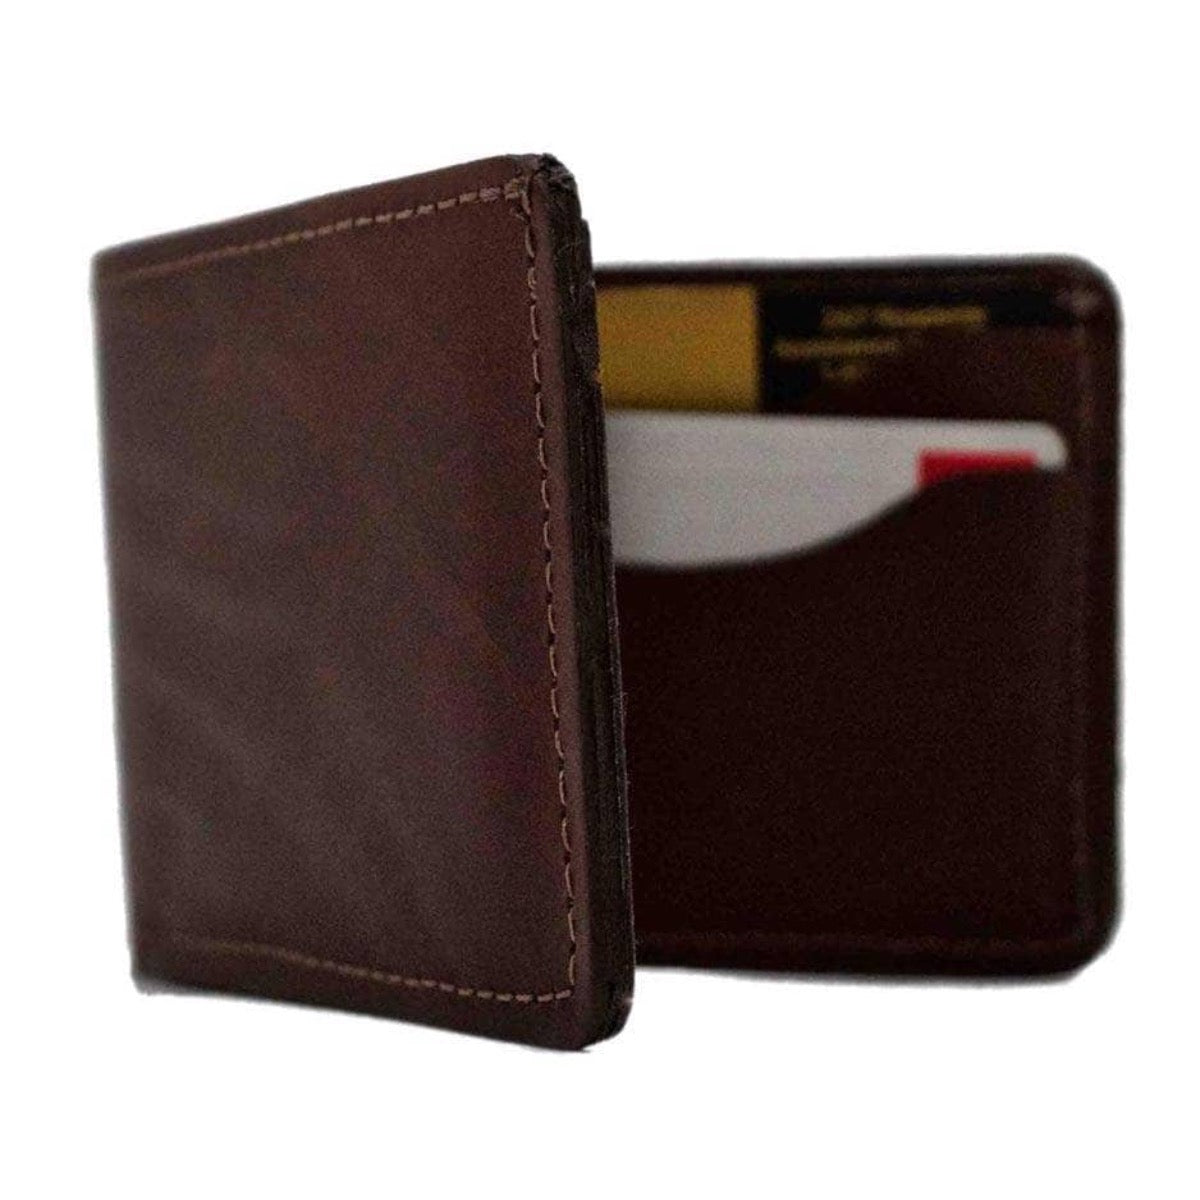 Thin Leather Wallet | Handmade Leather Wallets USA